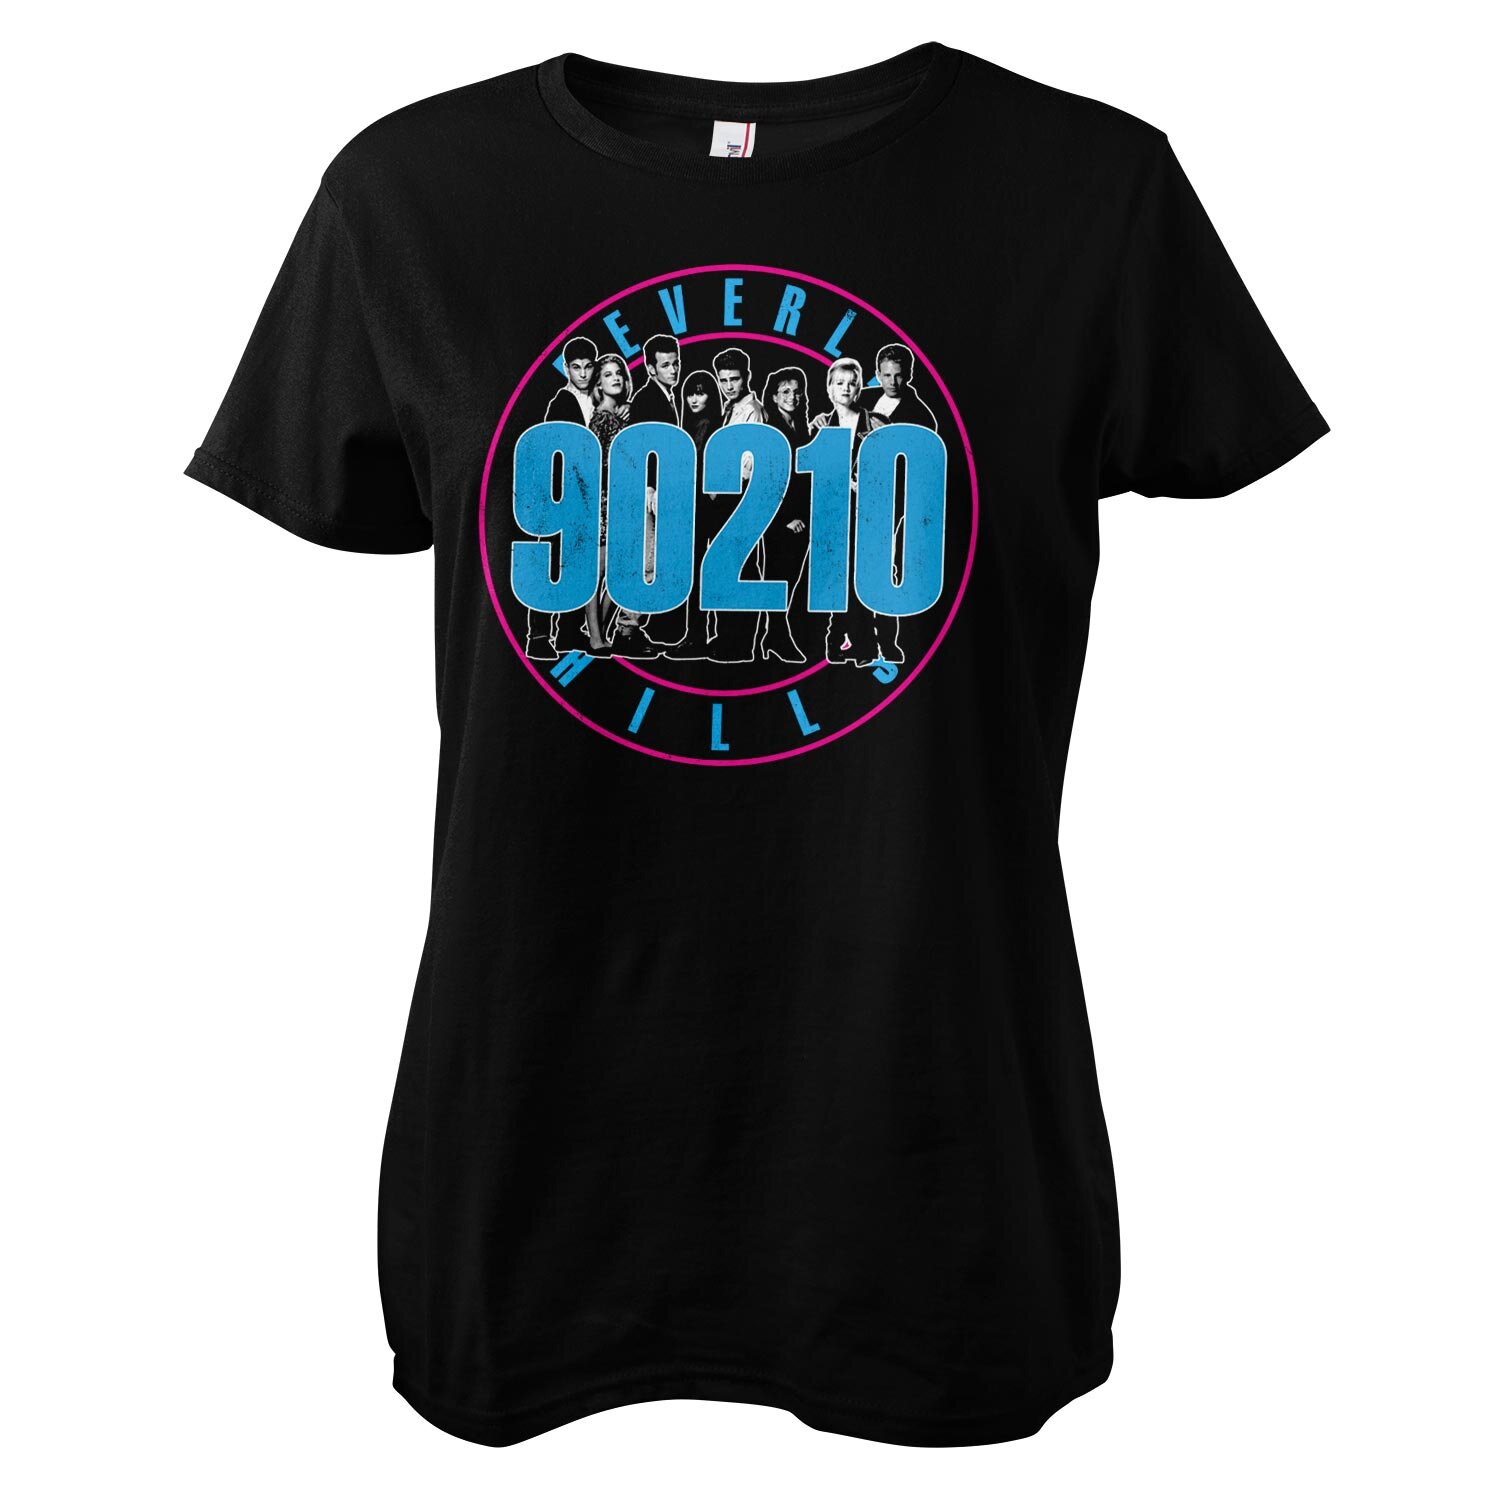 Beverly Hills 90210 Cast Girly Tee